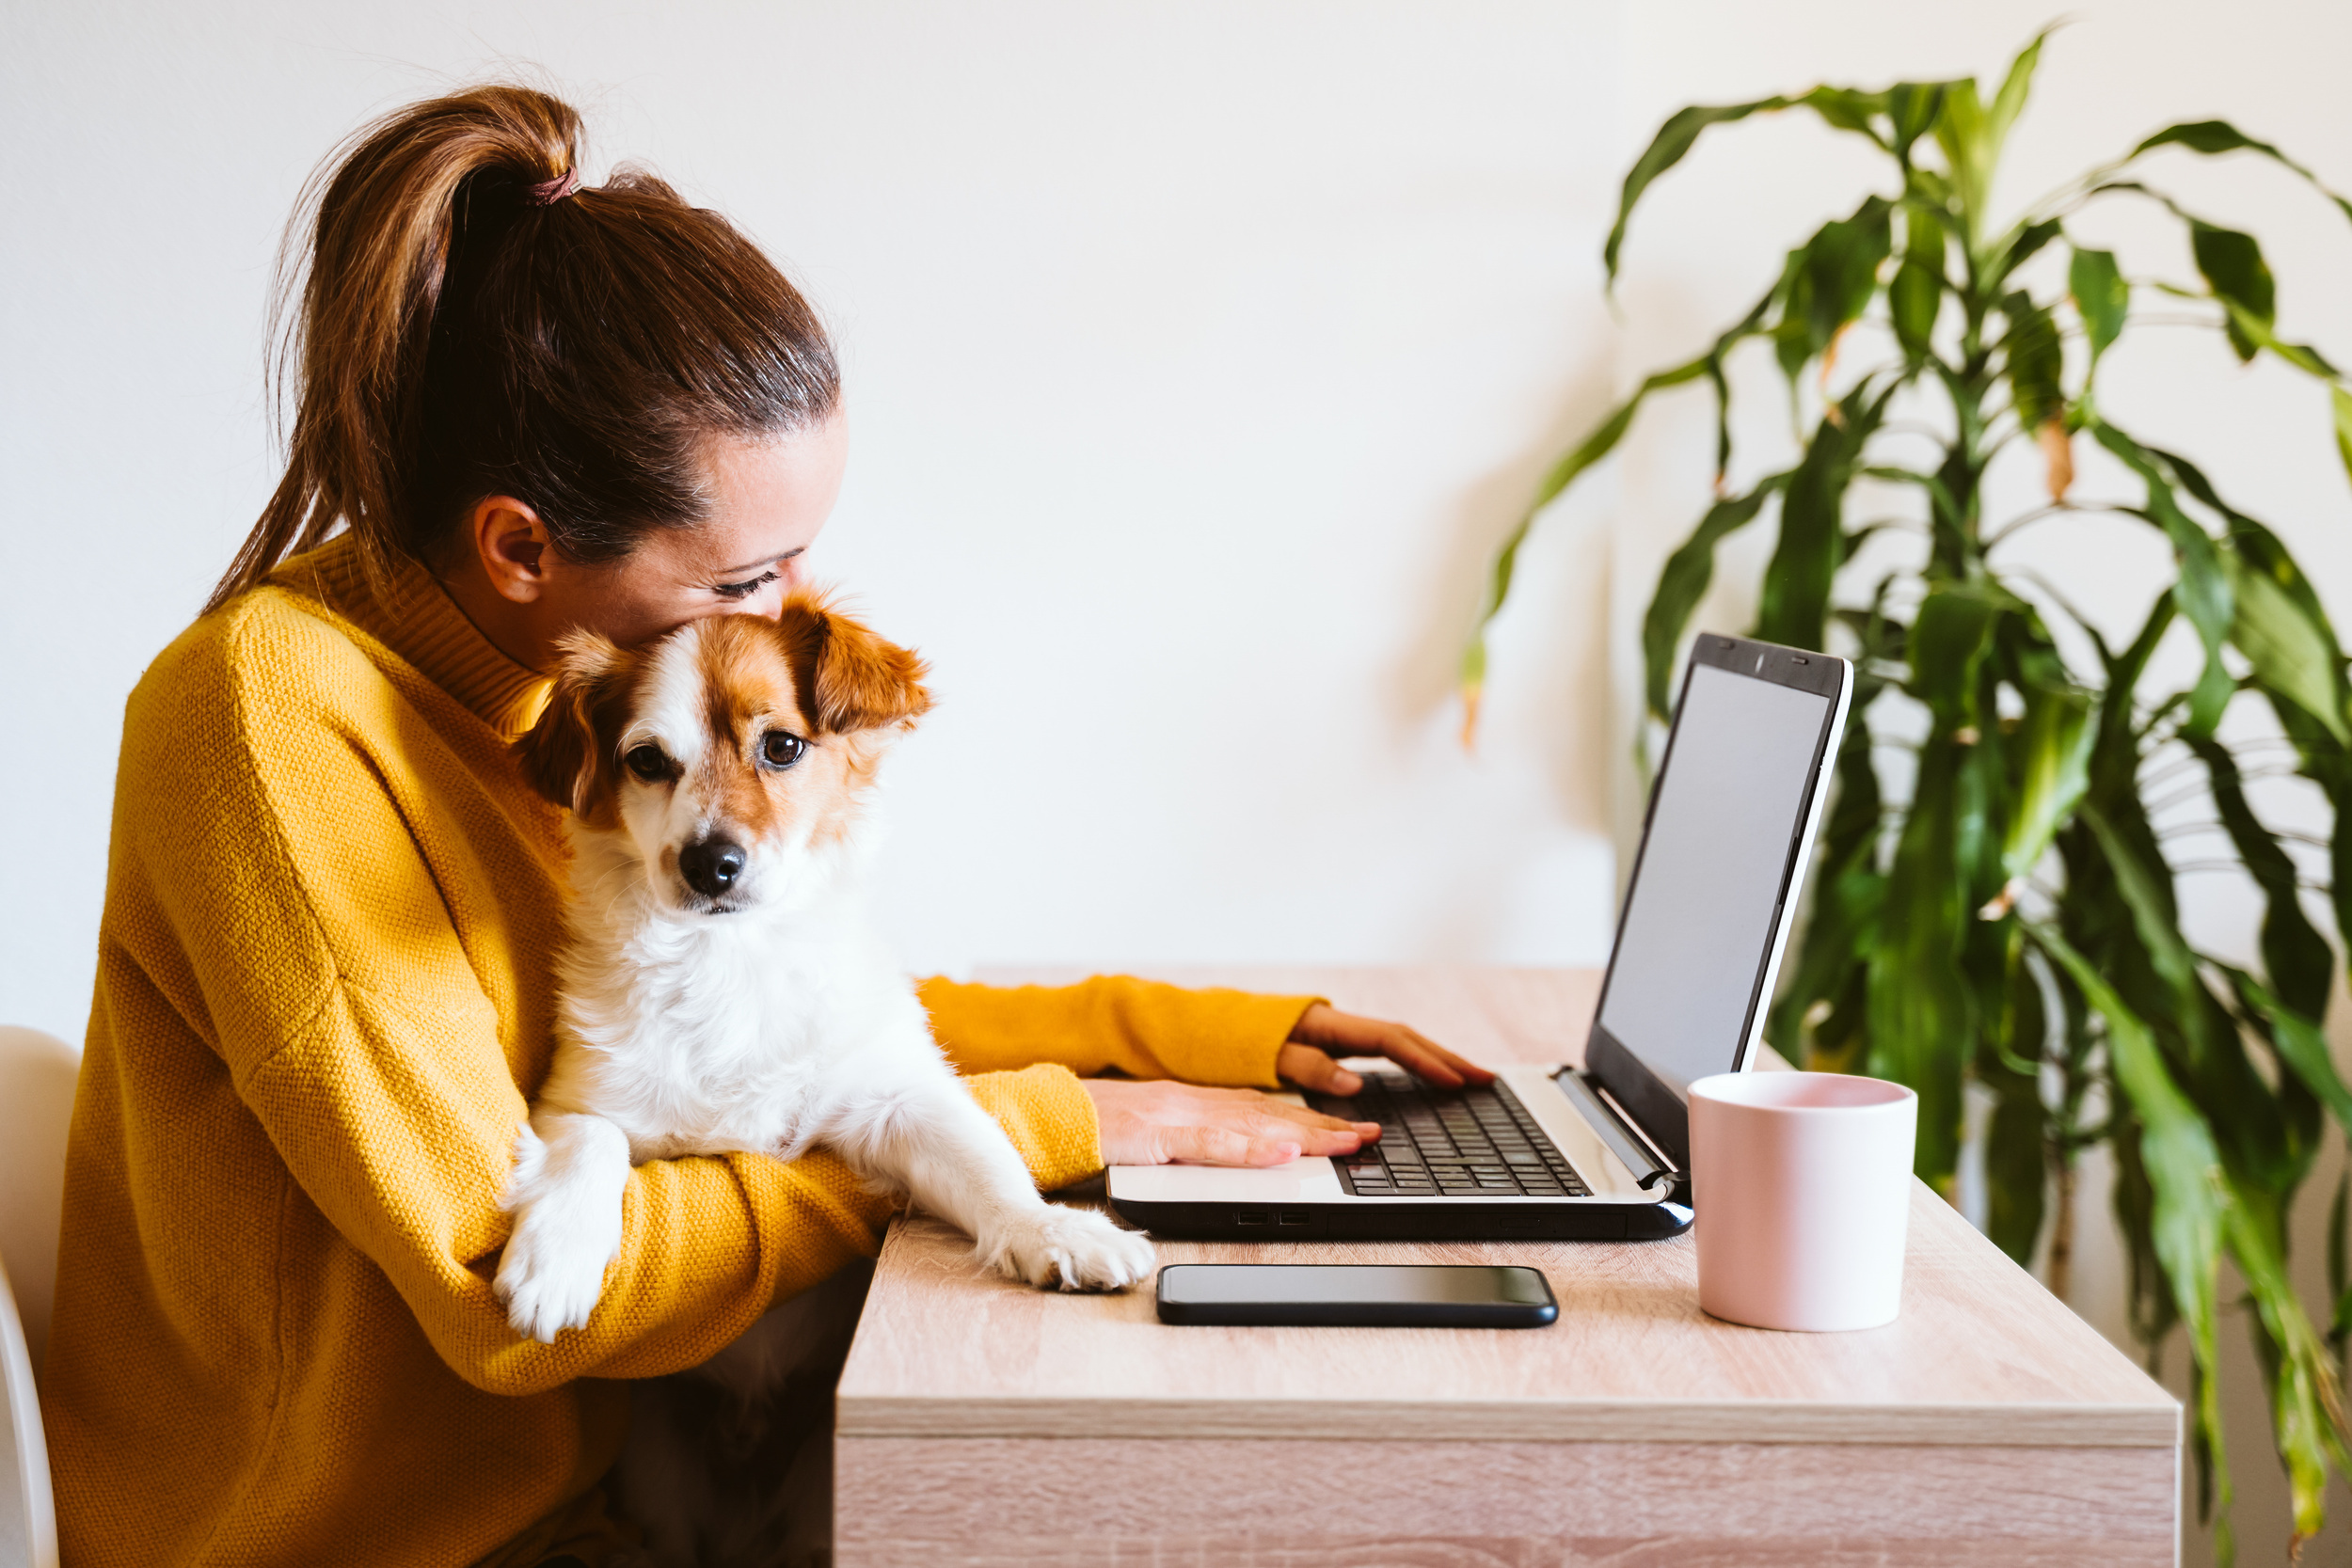 <p>The love for an animal is truly universal. But you won’t find the excessive dog-friendly culture that is prevalent in many American cities in a lot of other countries. And people aren’t dying to pet every dog that walks by — something that seems to be the norm amongst us Yanks.</p><p><a href='https://www.msn.com/en-us/community/channel/vid-cj9pqbr0vn9in2b6ddcd8sfgpfq6x6utp44fssrv6mc2gtybw0us'>Follow us on MSN to see more of our exclusive lifestyle content.</a></p>